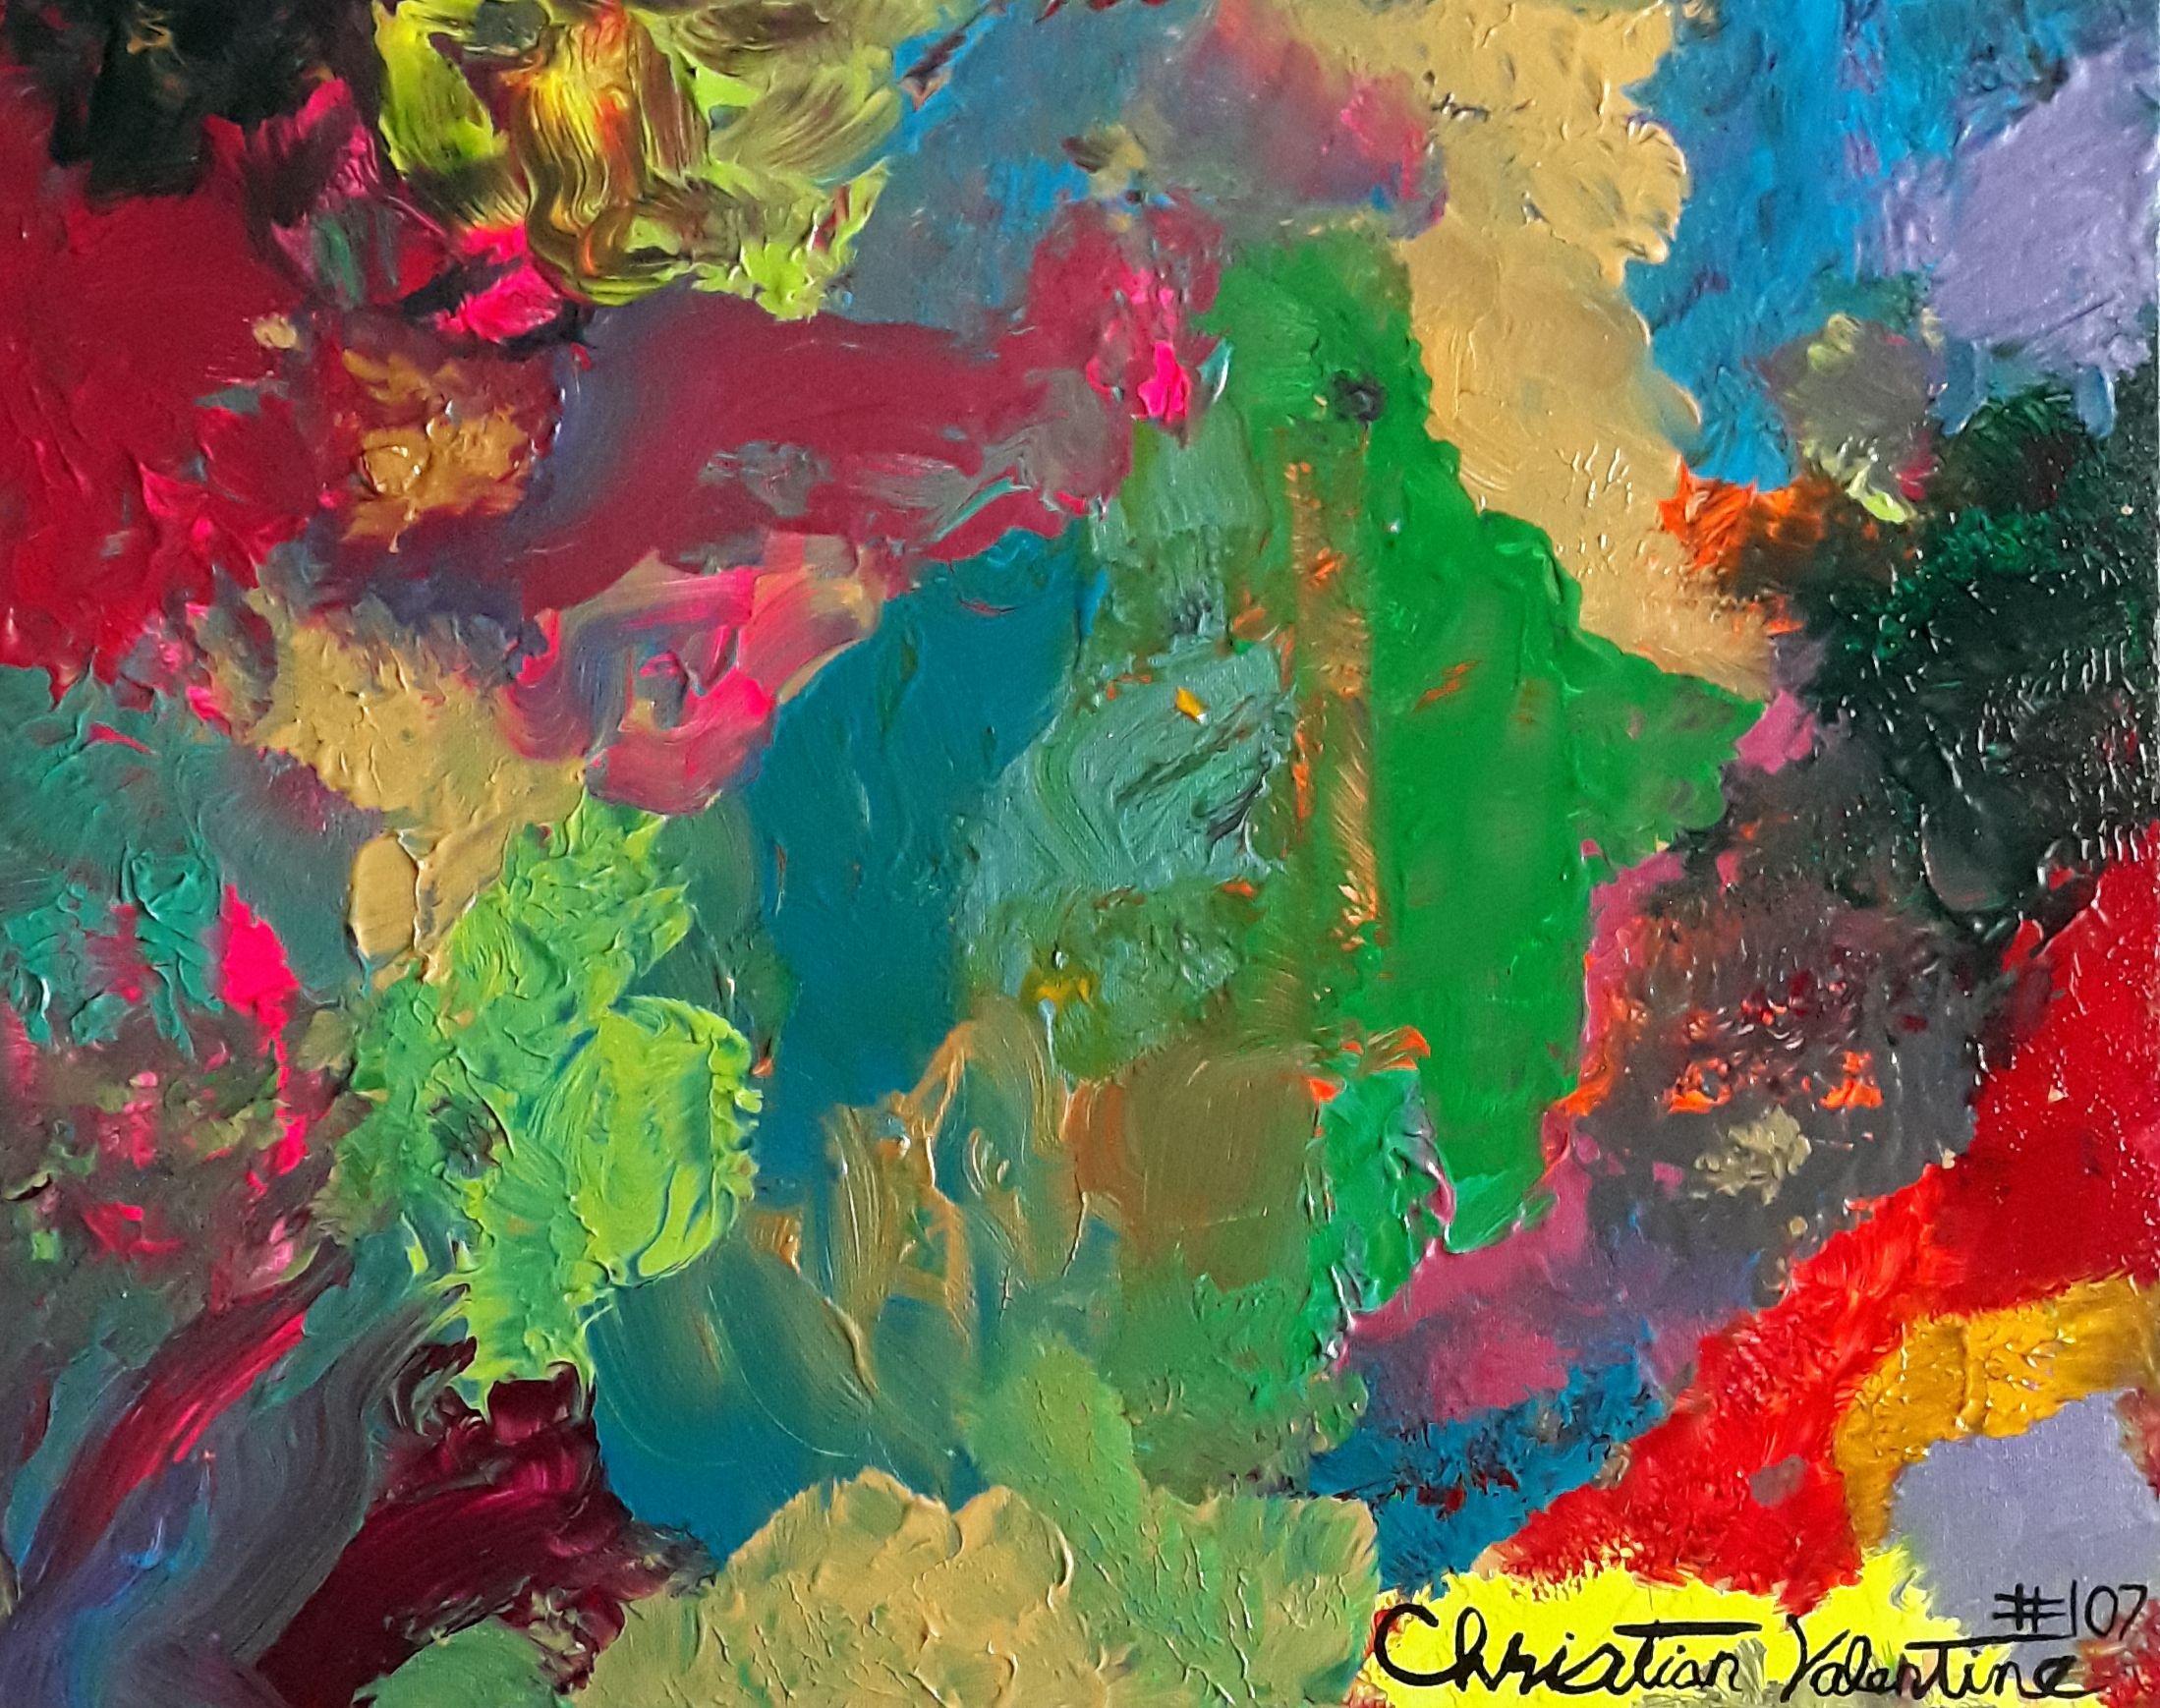 Abstract Painting Christian Valentine - Ancient Hawaii, Peinture, Acrylique sur Toile